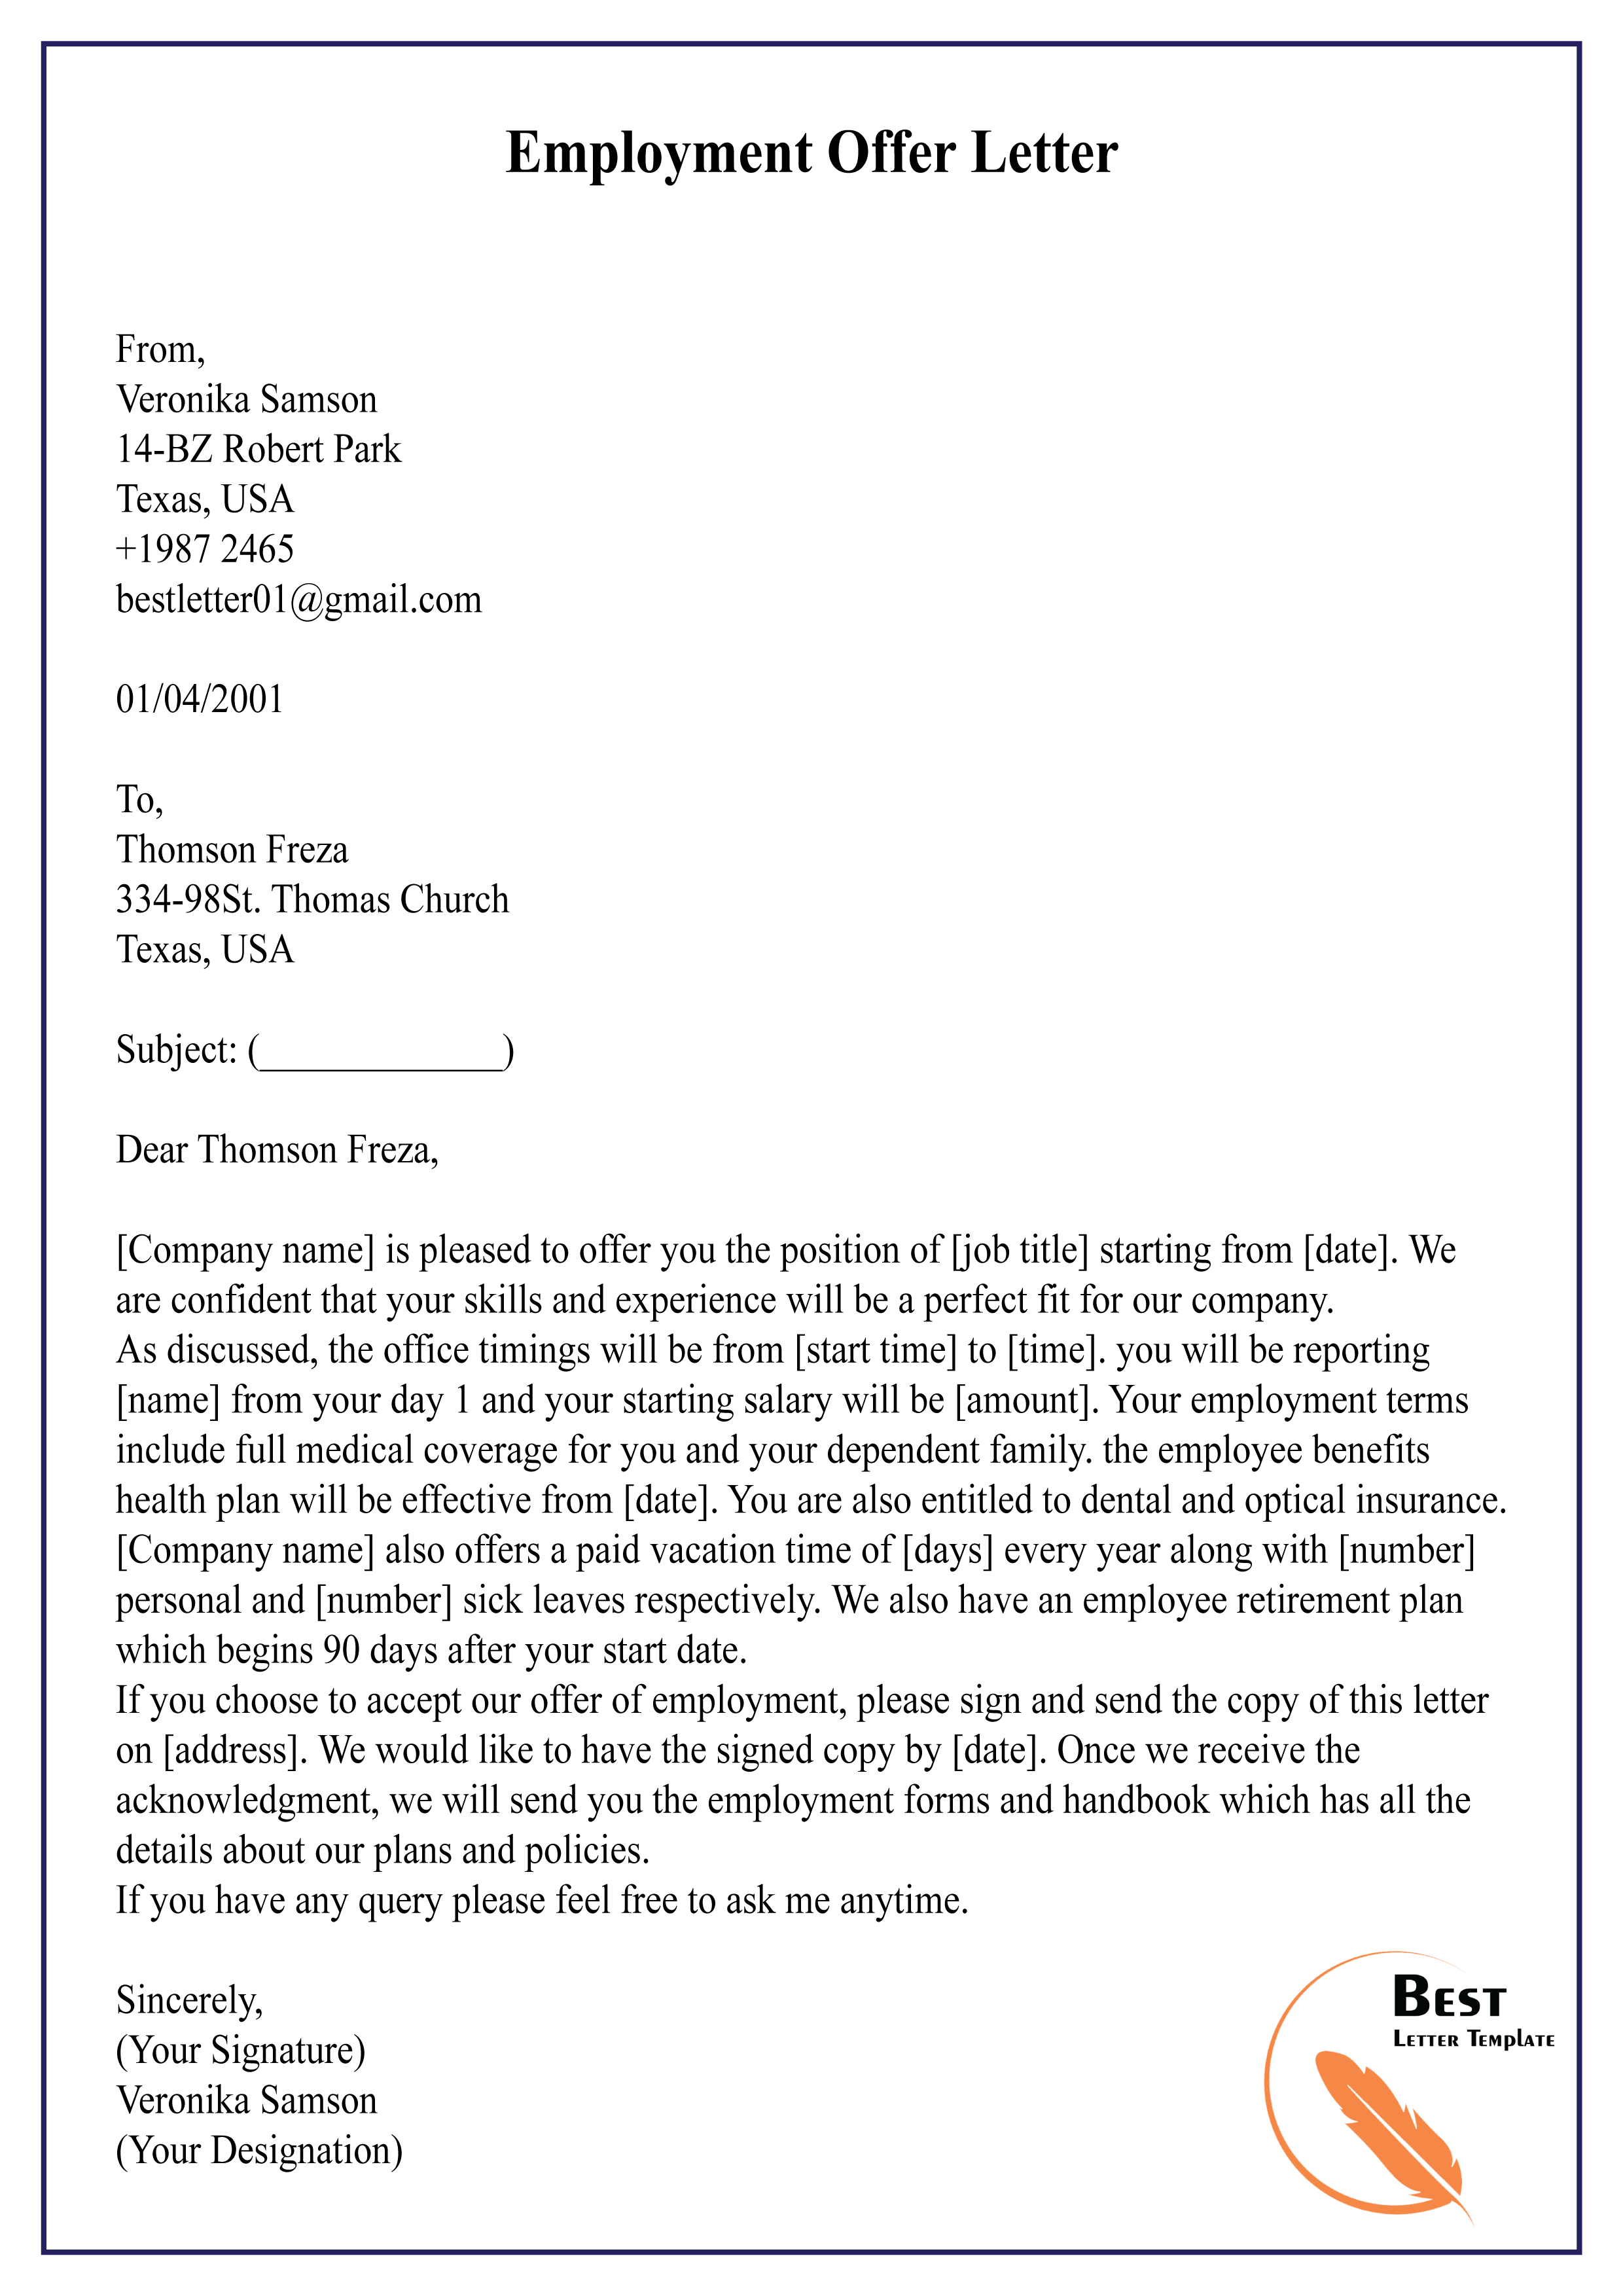 Free sample letter of job offers